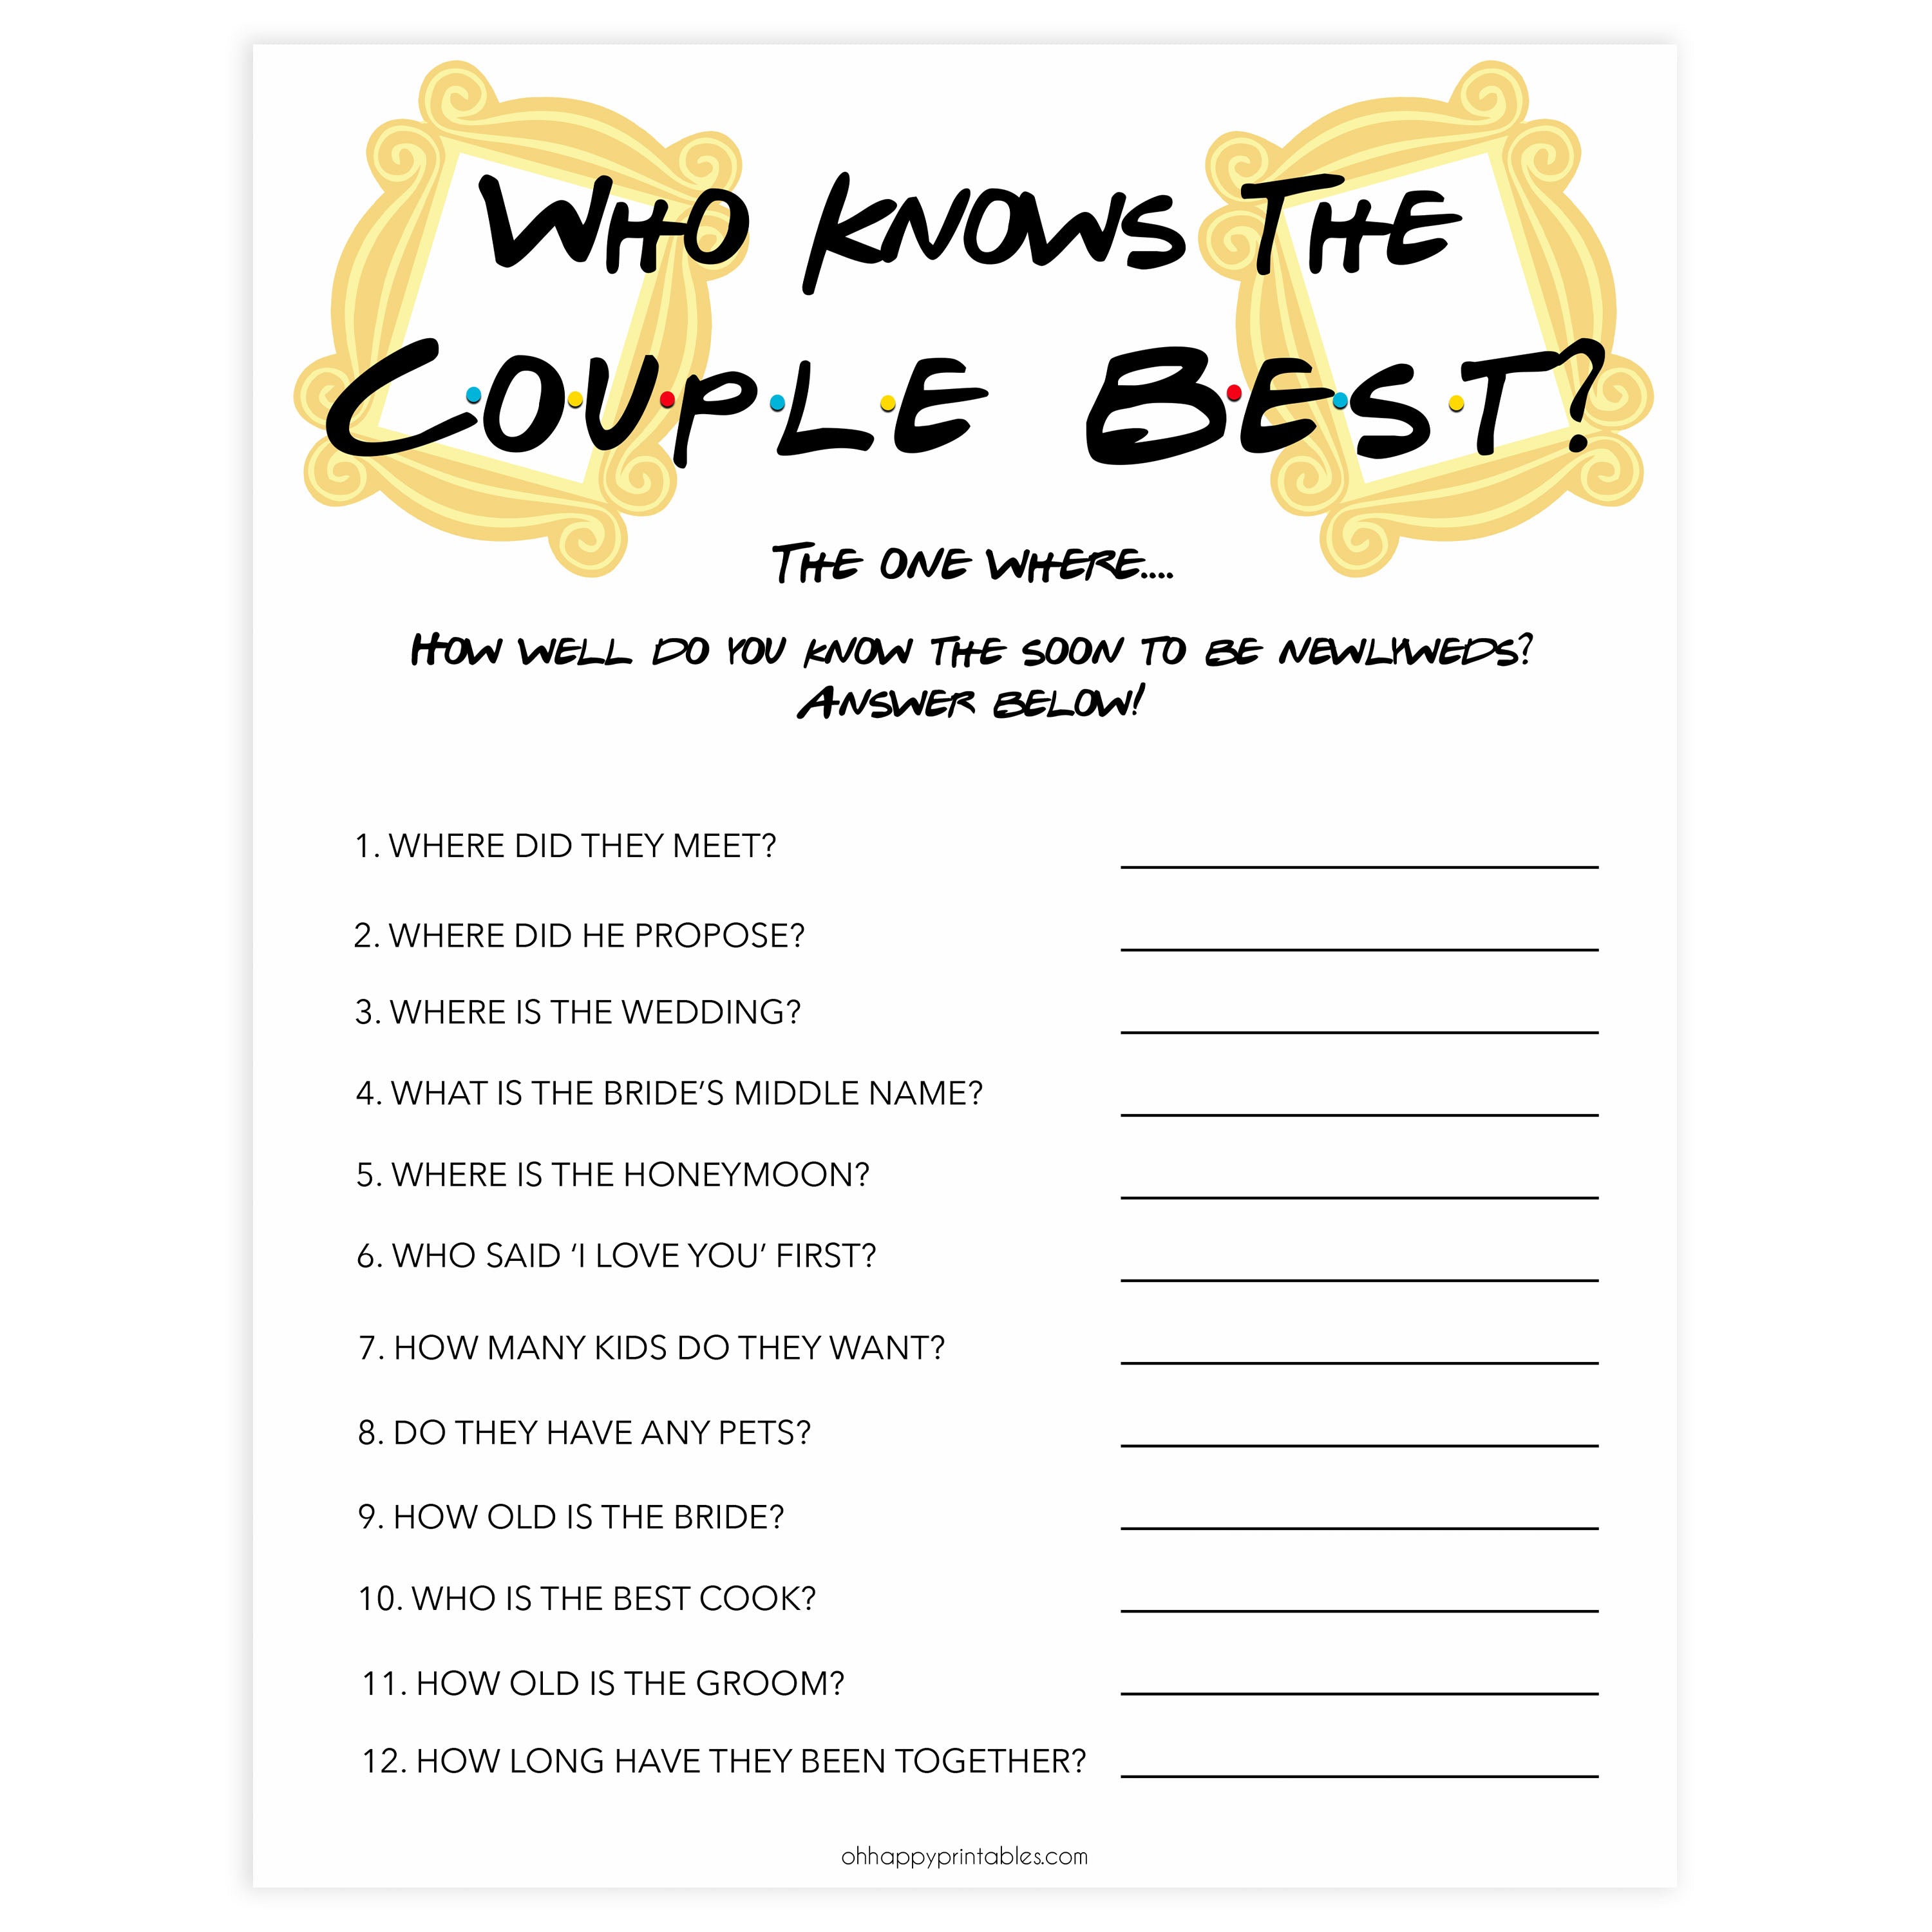 Who Knows the Couple Best | Shop Friends Bridal Shower Games